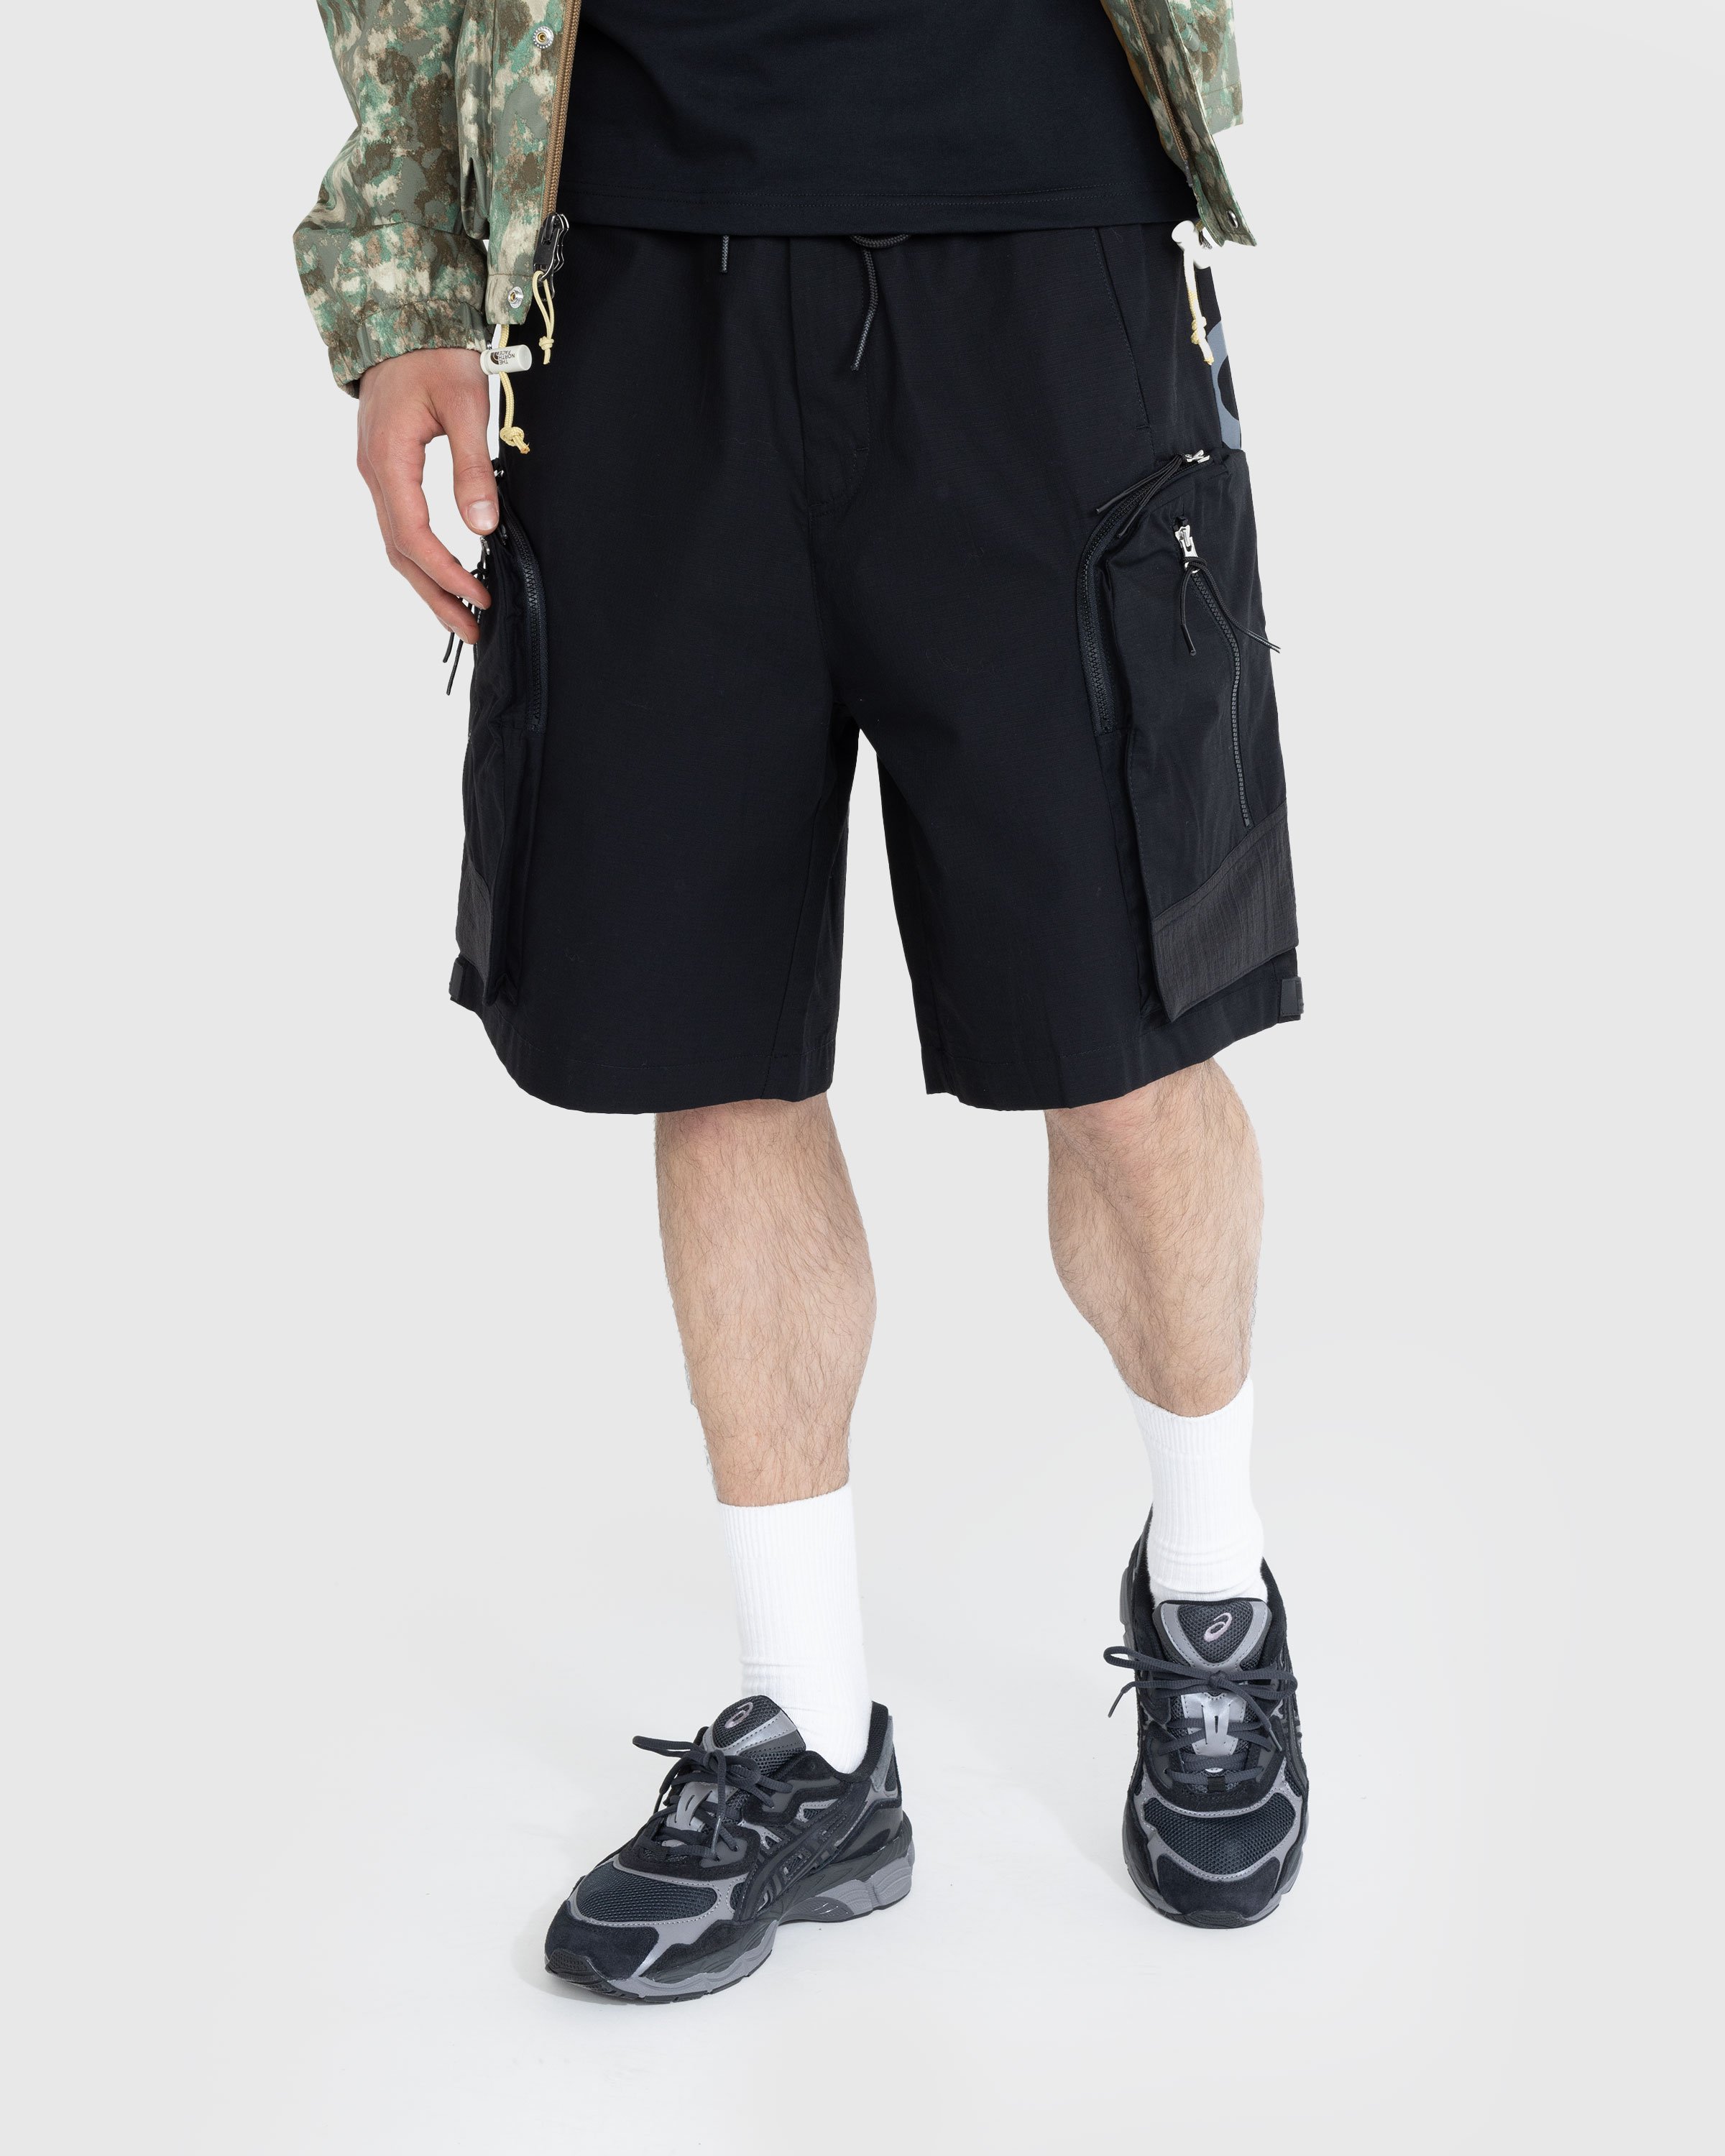 A-Cold-Wall* - Overset Tech Shorts Black - Clothing - Black - Image 2